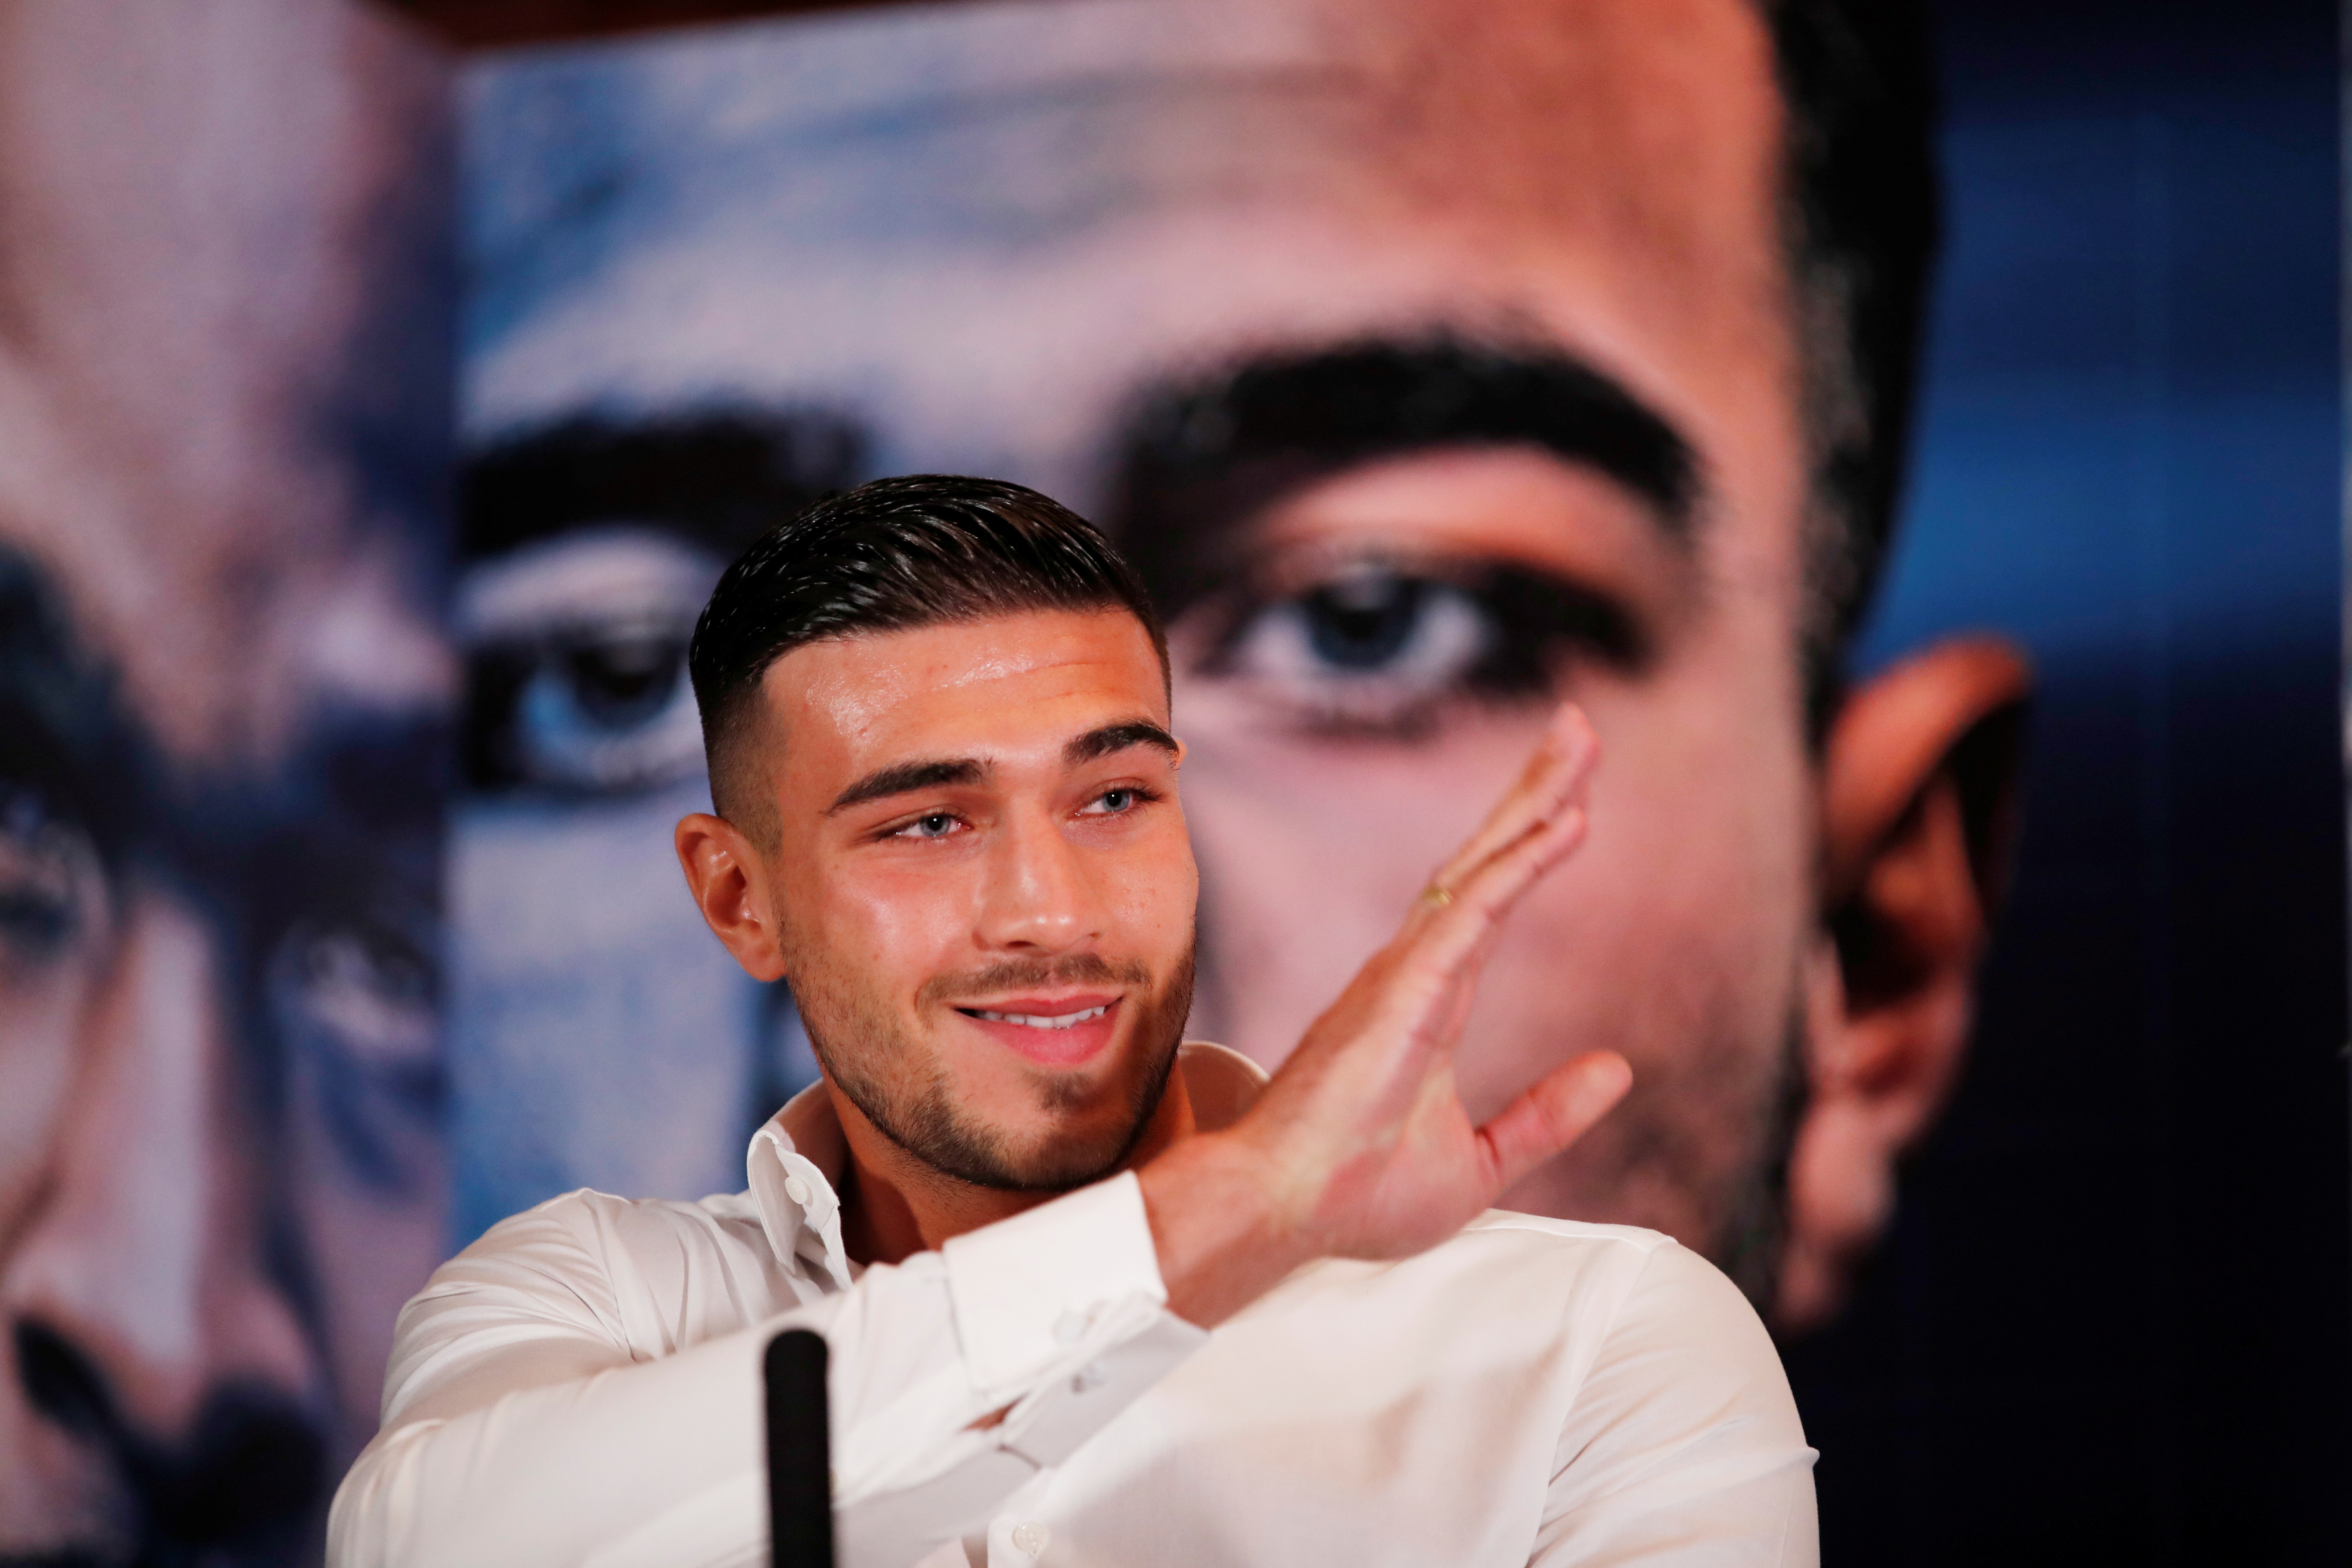 Boxing - Queensberry Promotions Press Conference - The Landmark hotel, London, Britain - August 3, 2021  Tommy Fury during the press conference  Action Images via Reuters/Peter Cziborra